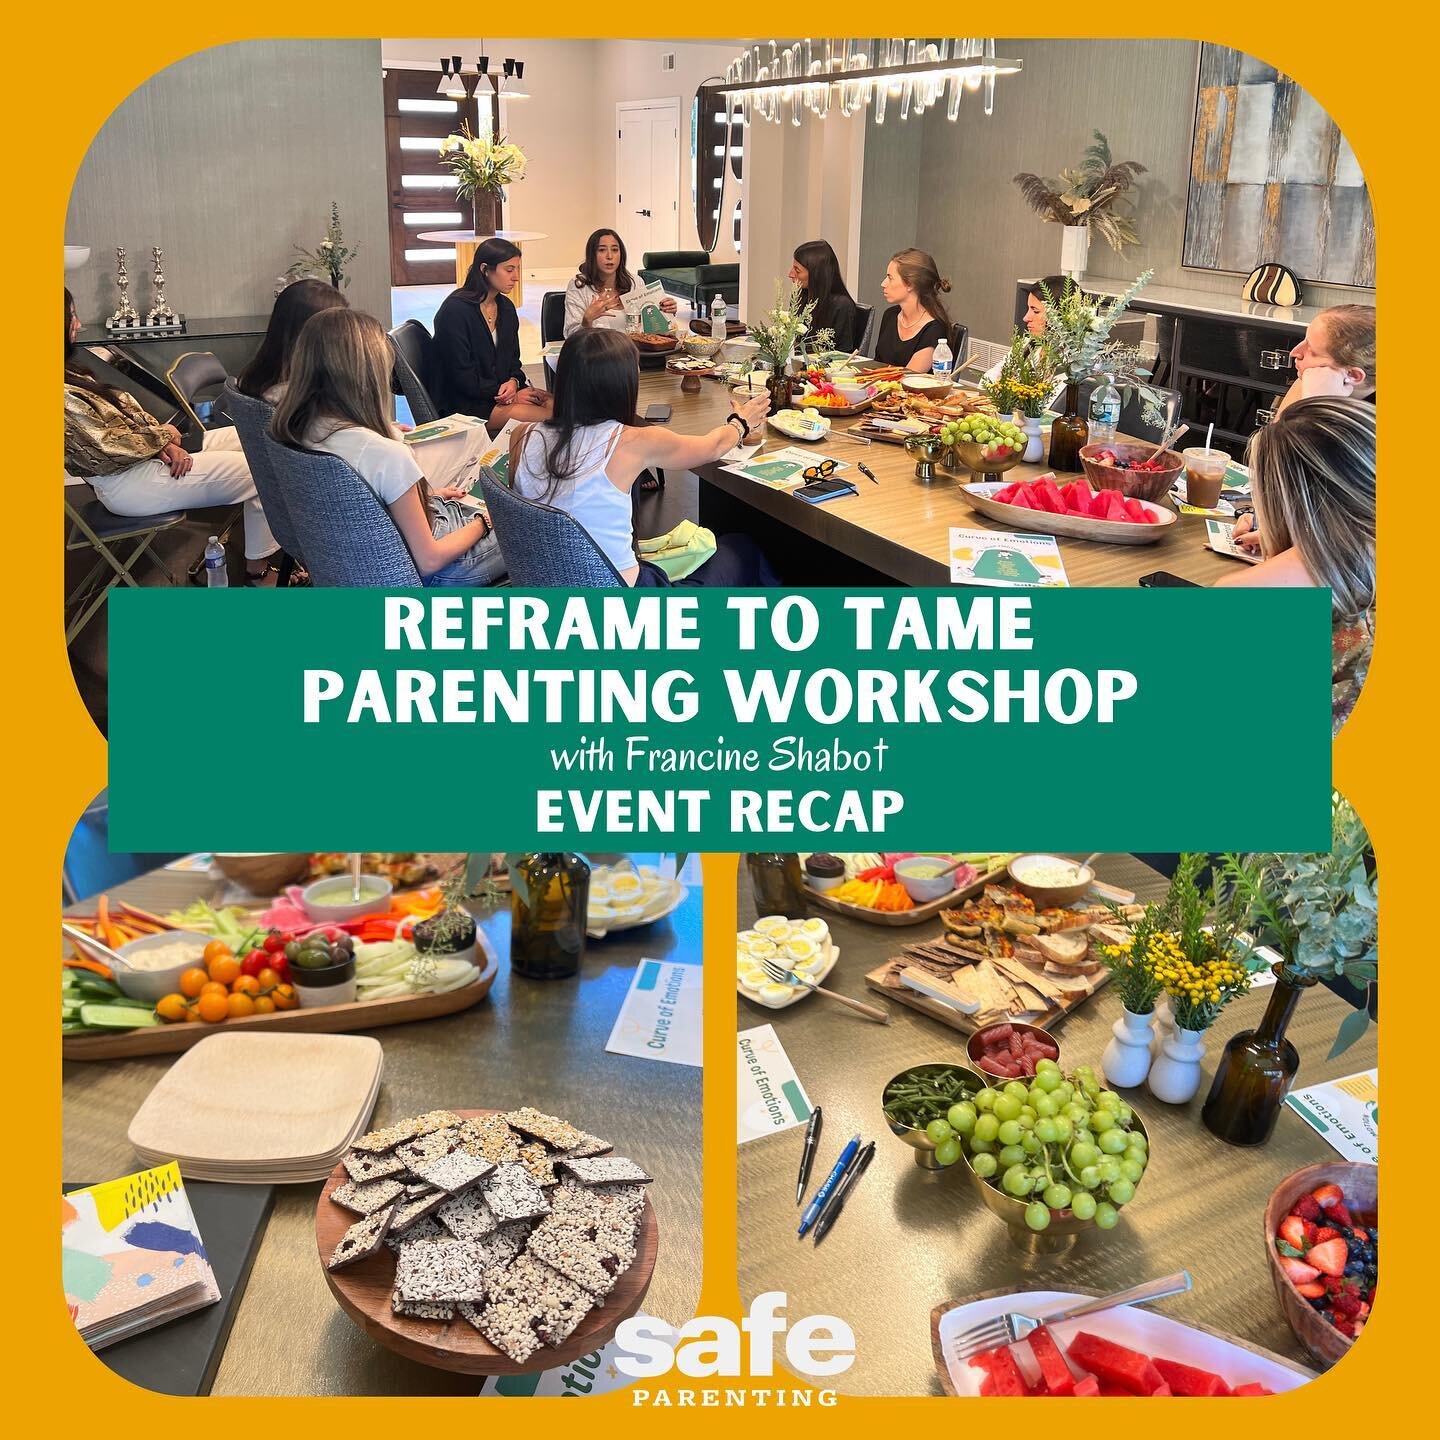 Thank you to everyone who came to our parenting workshop with Francine Shabot! Swipe to see some tips that Francine gave us. We can&rsquo;t wait host more workshops like this in the future!

#parenting #safeparenting #parentingtips #toddlerparenting 